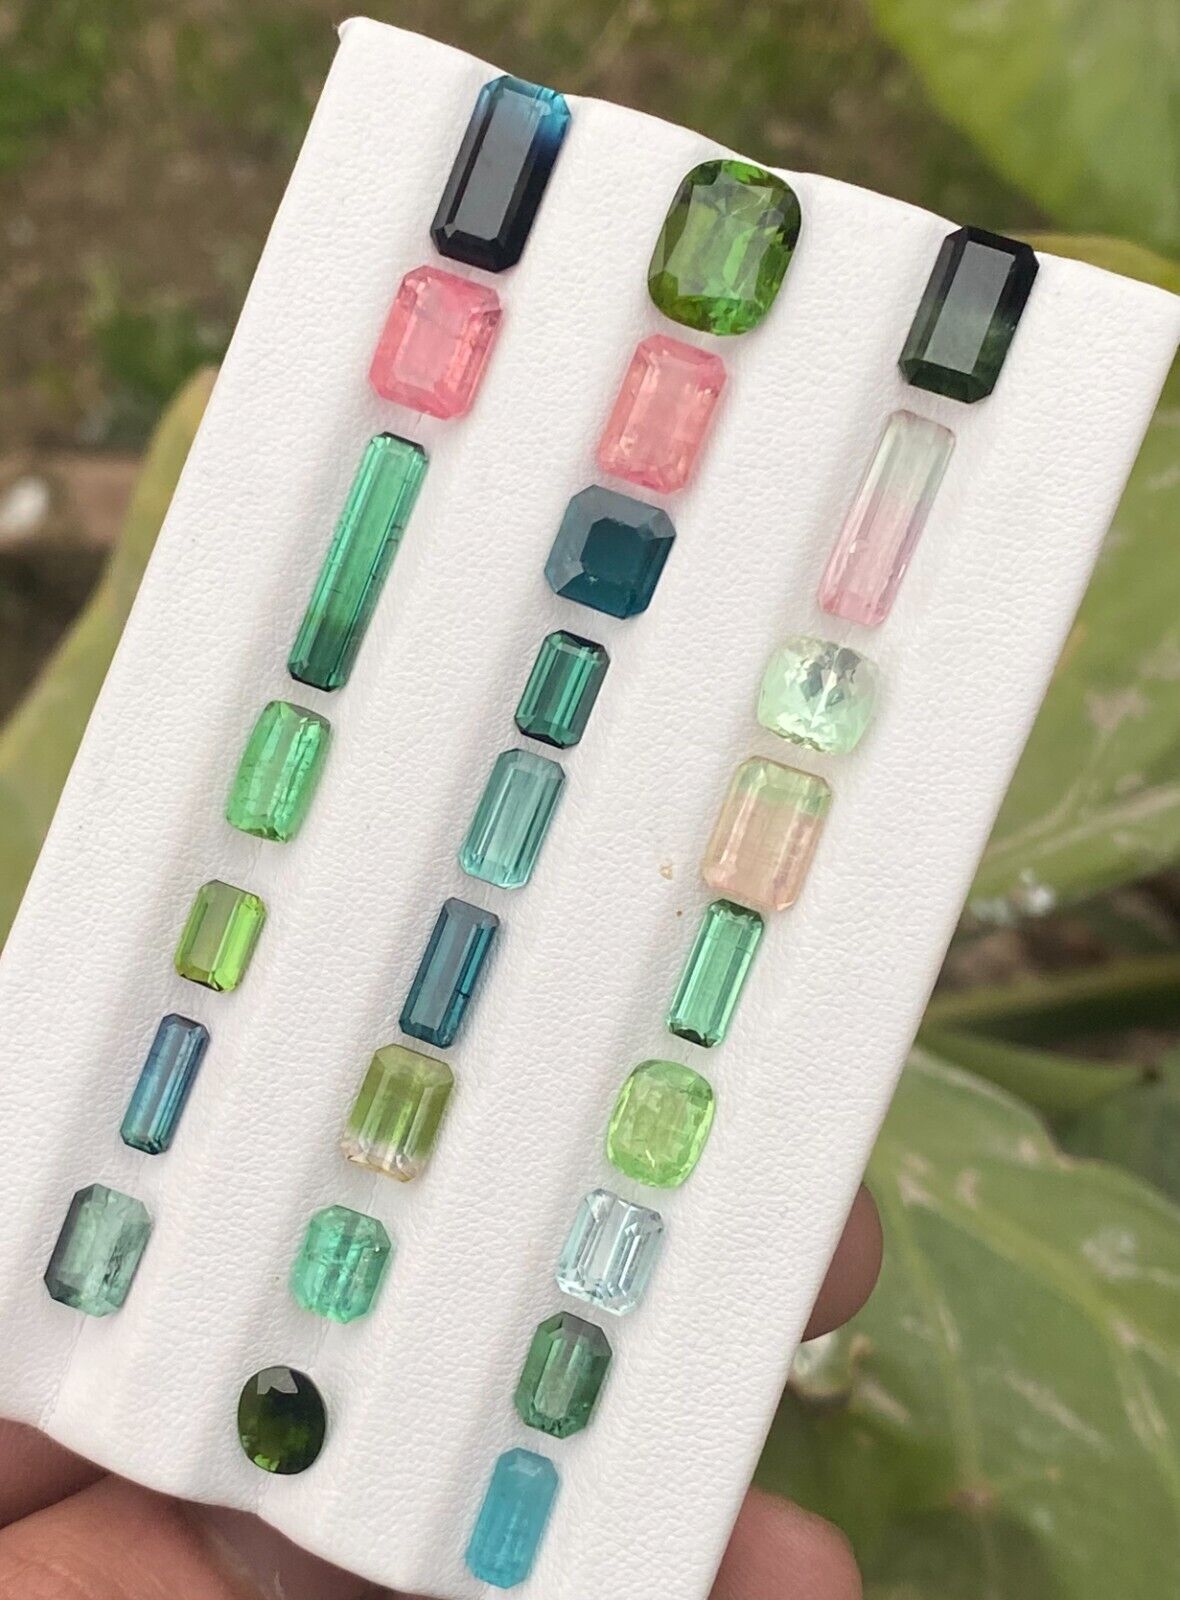 48ct Natural Cut Tourmaline 25pcs Lot From Afghanistan